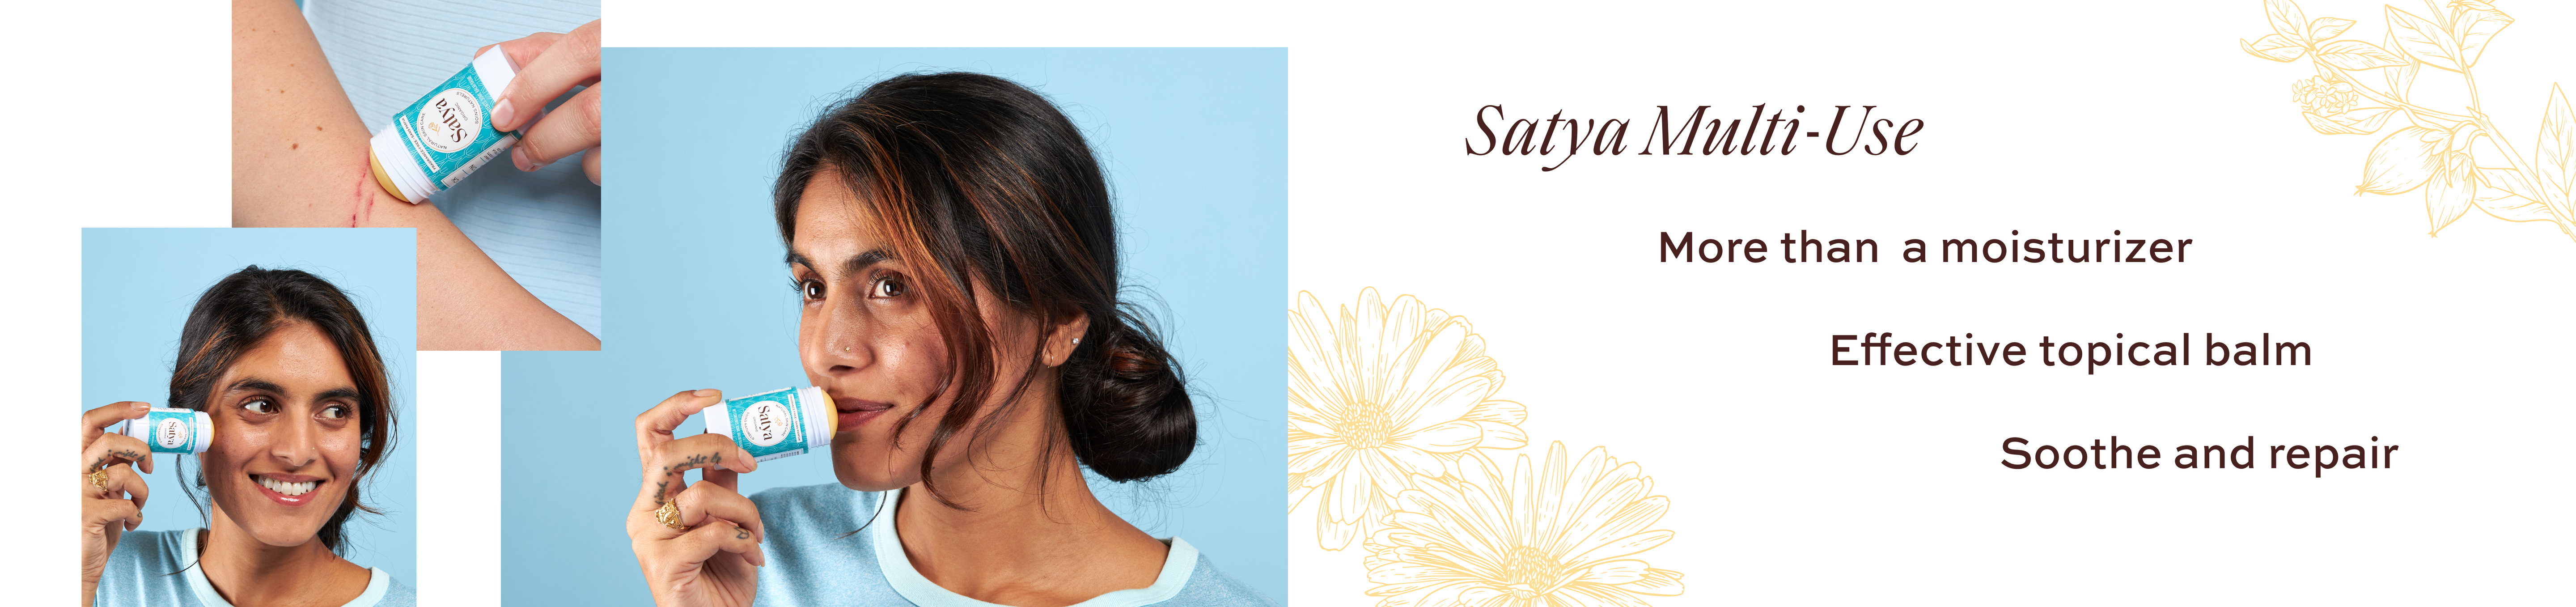 Satya Multi-Use. More than a moisturizer. Effective topical balm. Soothe and repair.